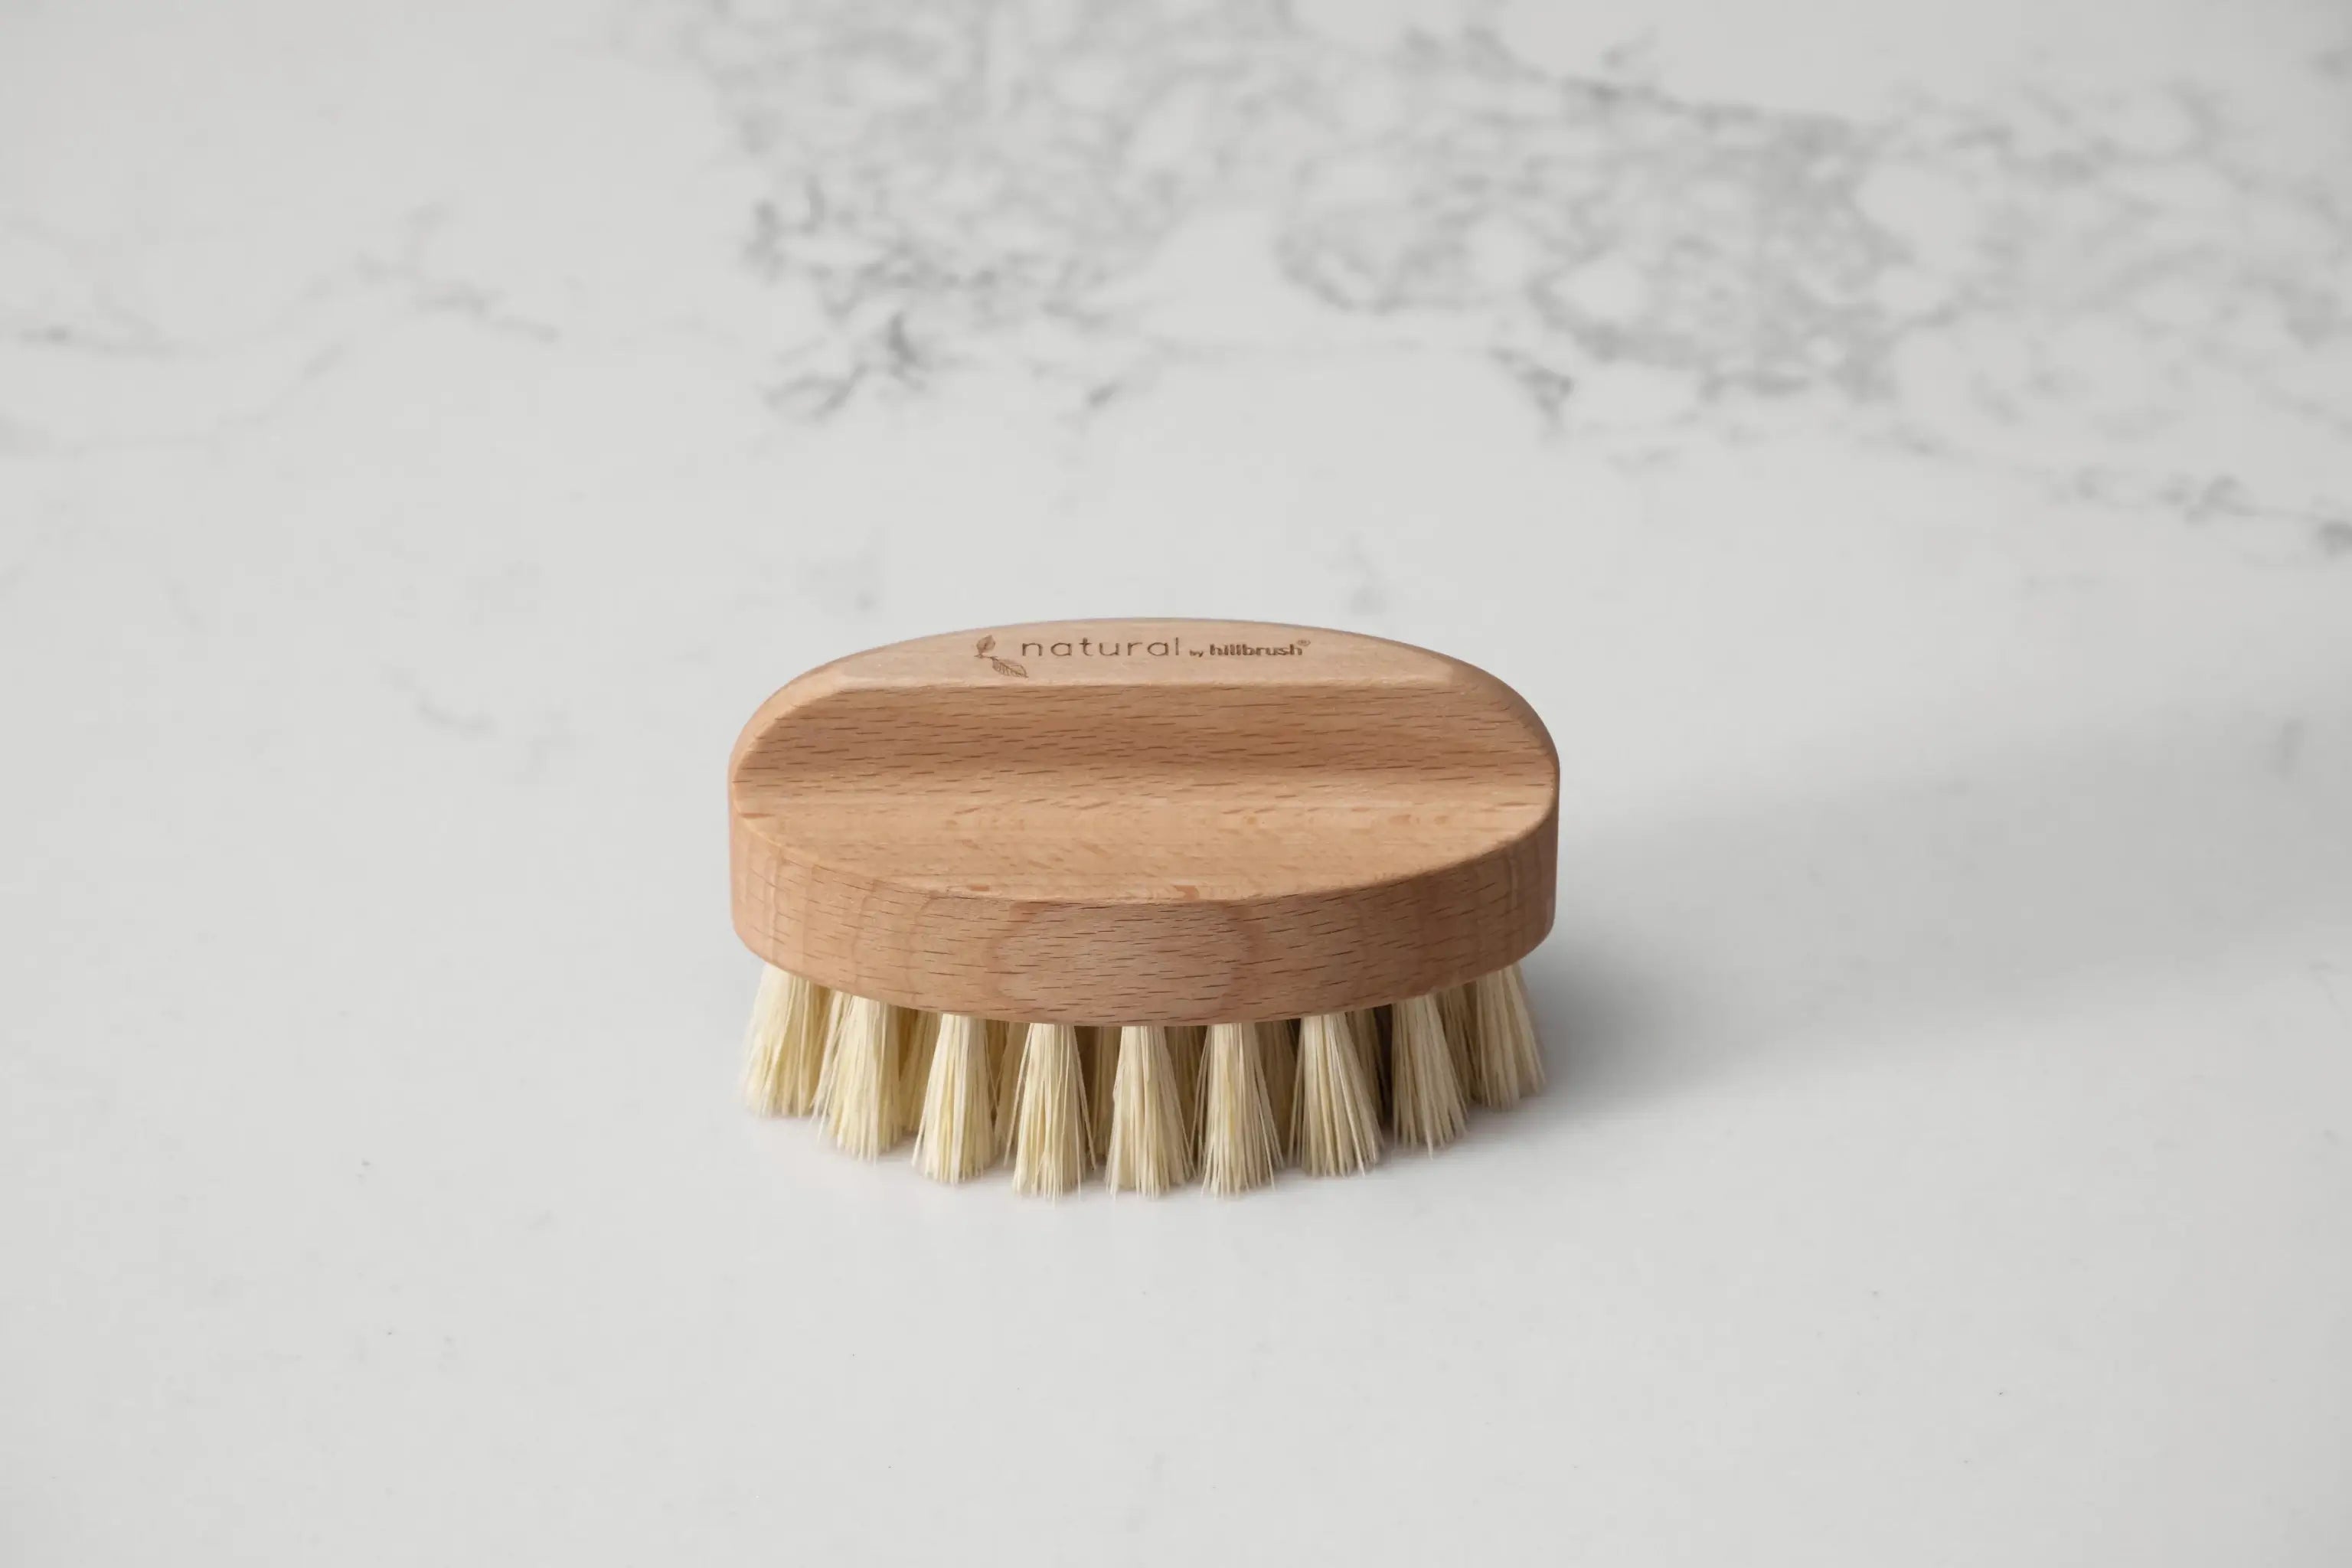 A small oval wooden nailbrush with thick fibres sits on a marbled background. Made by UK makers Hillbrush